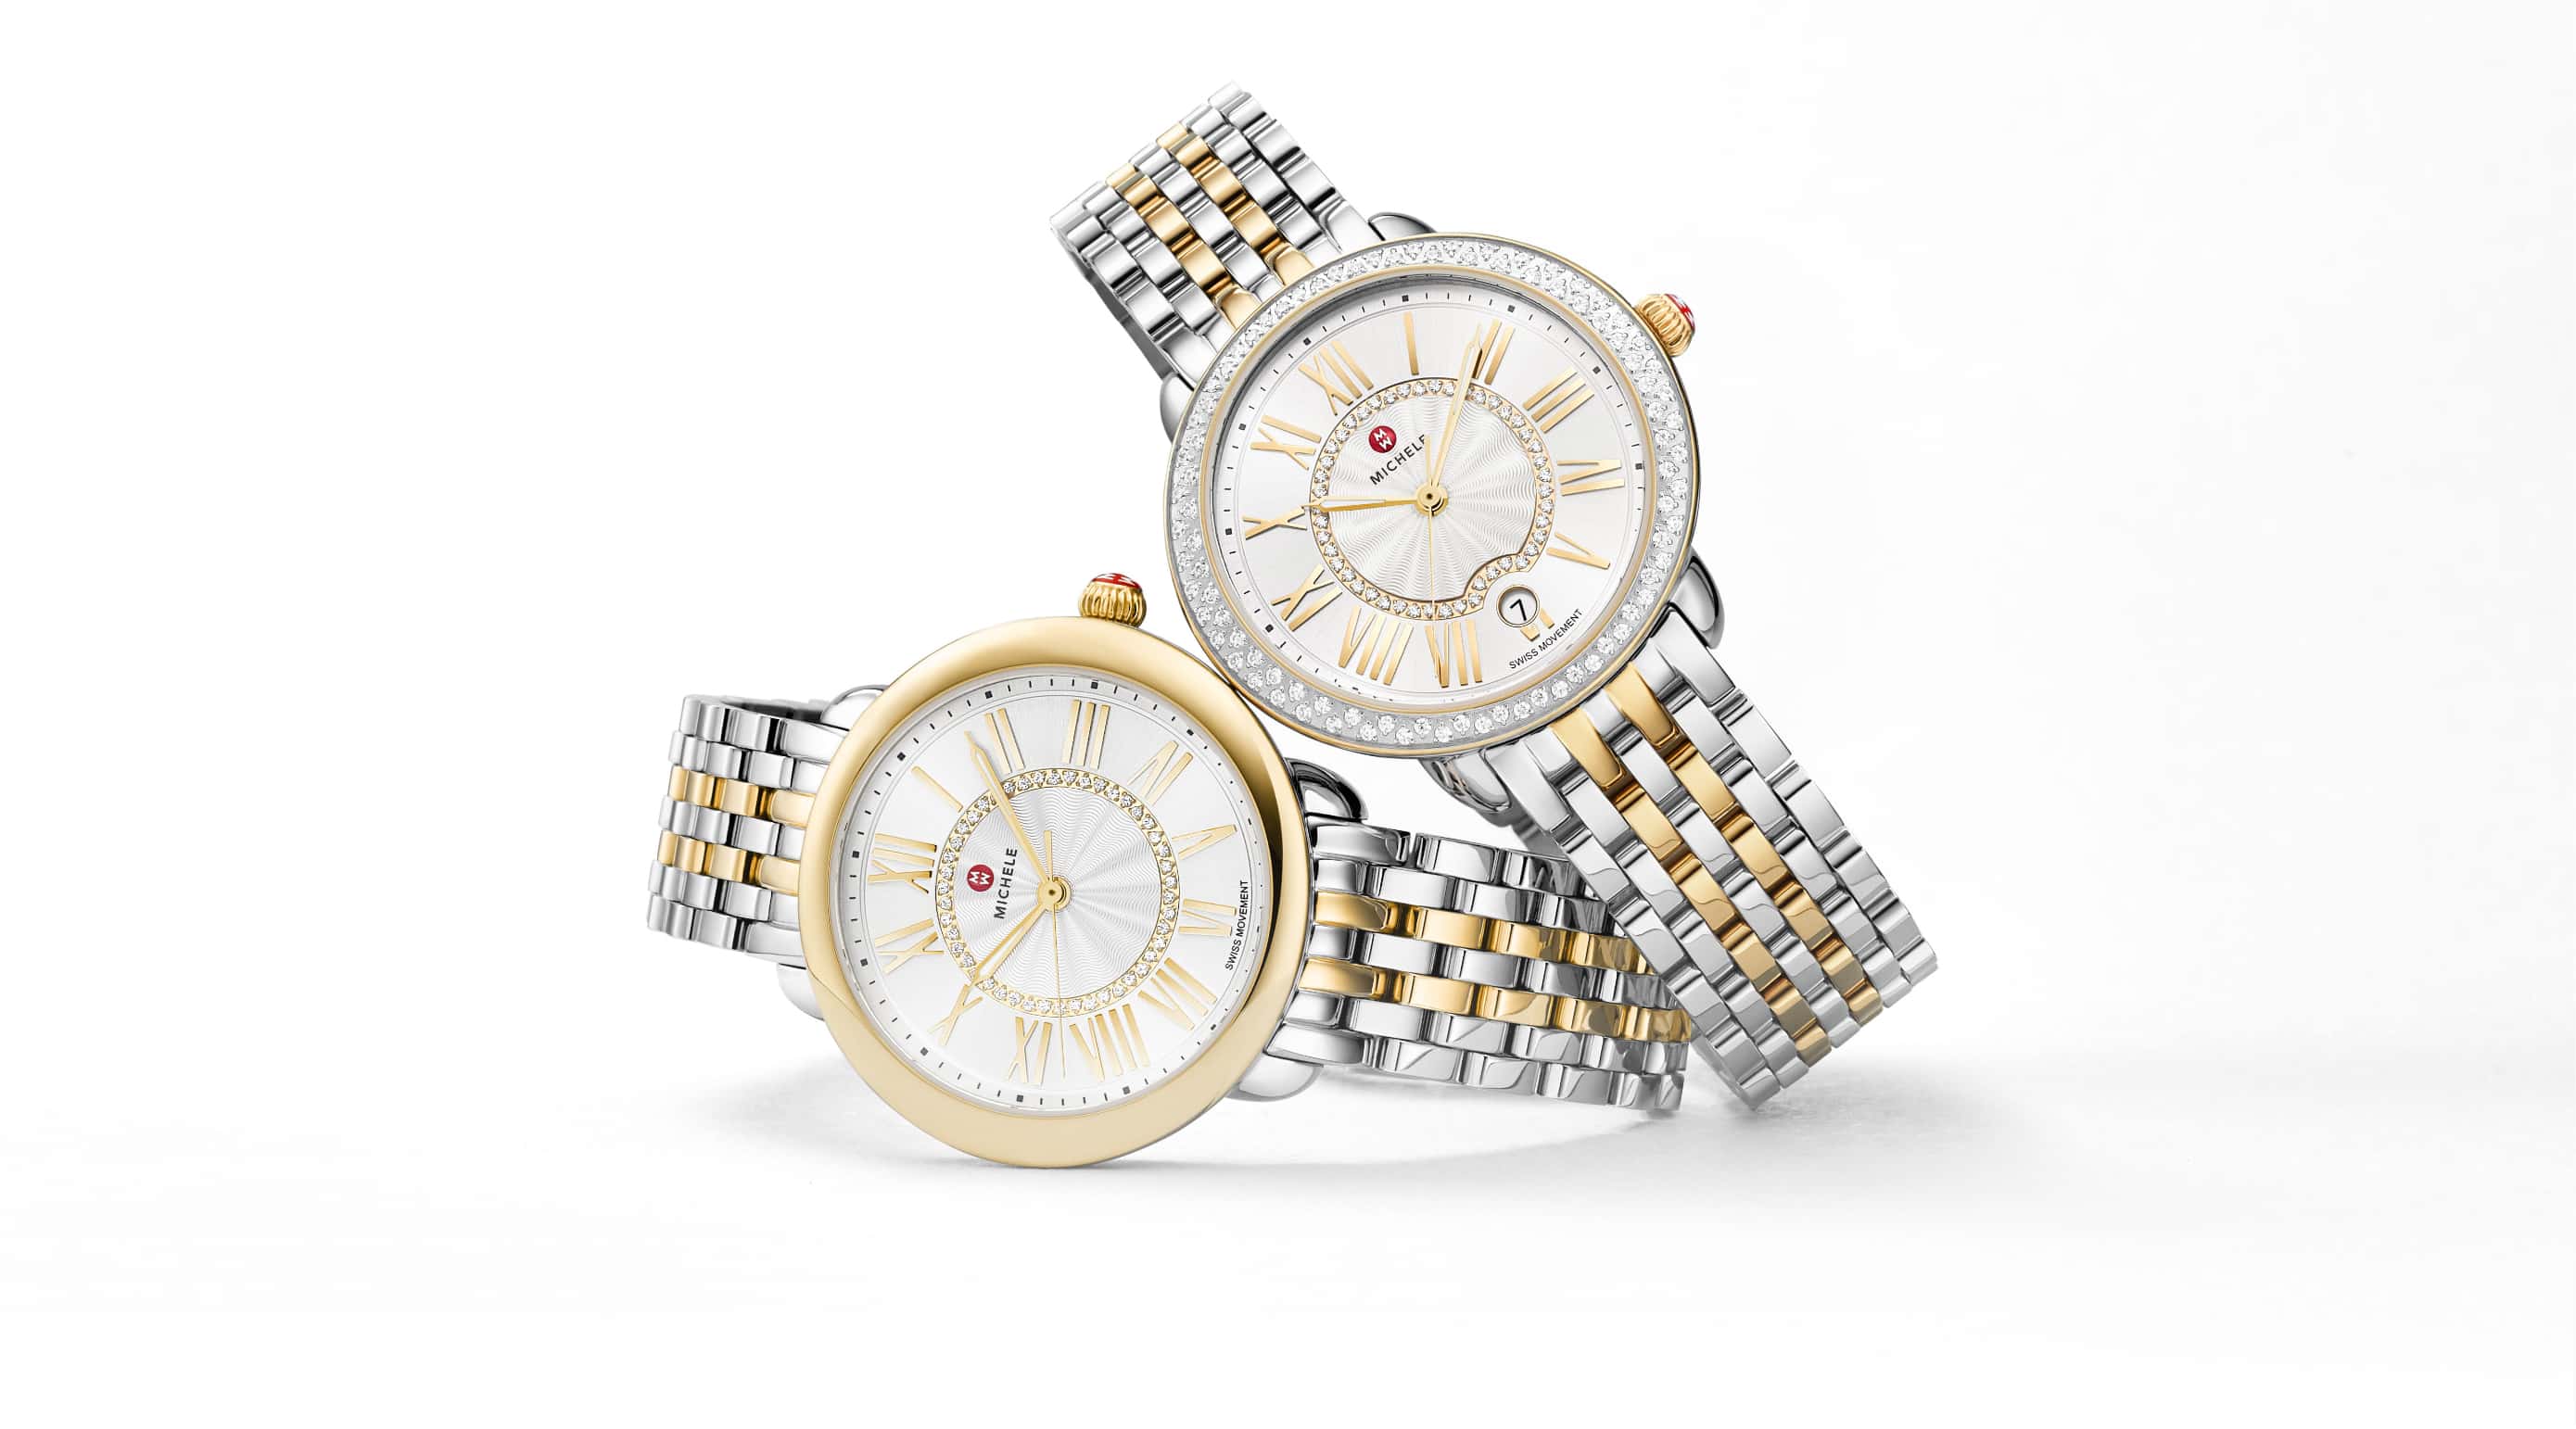 Two stainless with 18K gold serein watches, one with a diamond bezel and the other with an 18k gold bezel.